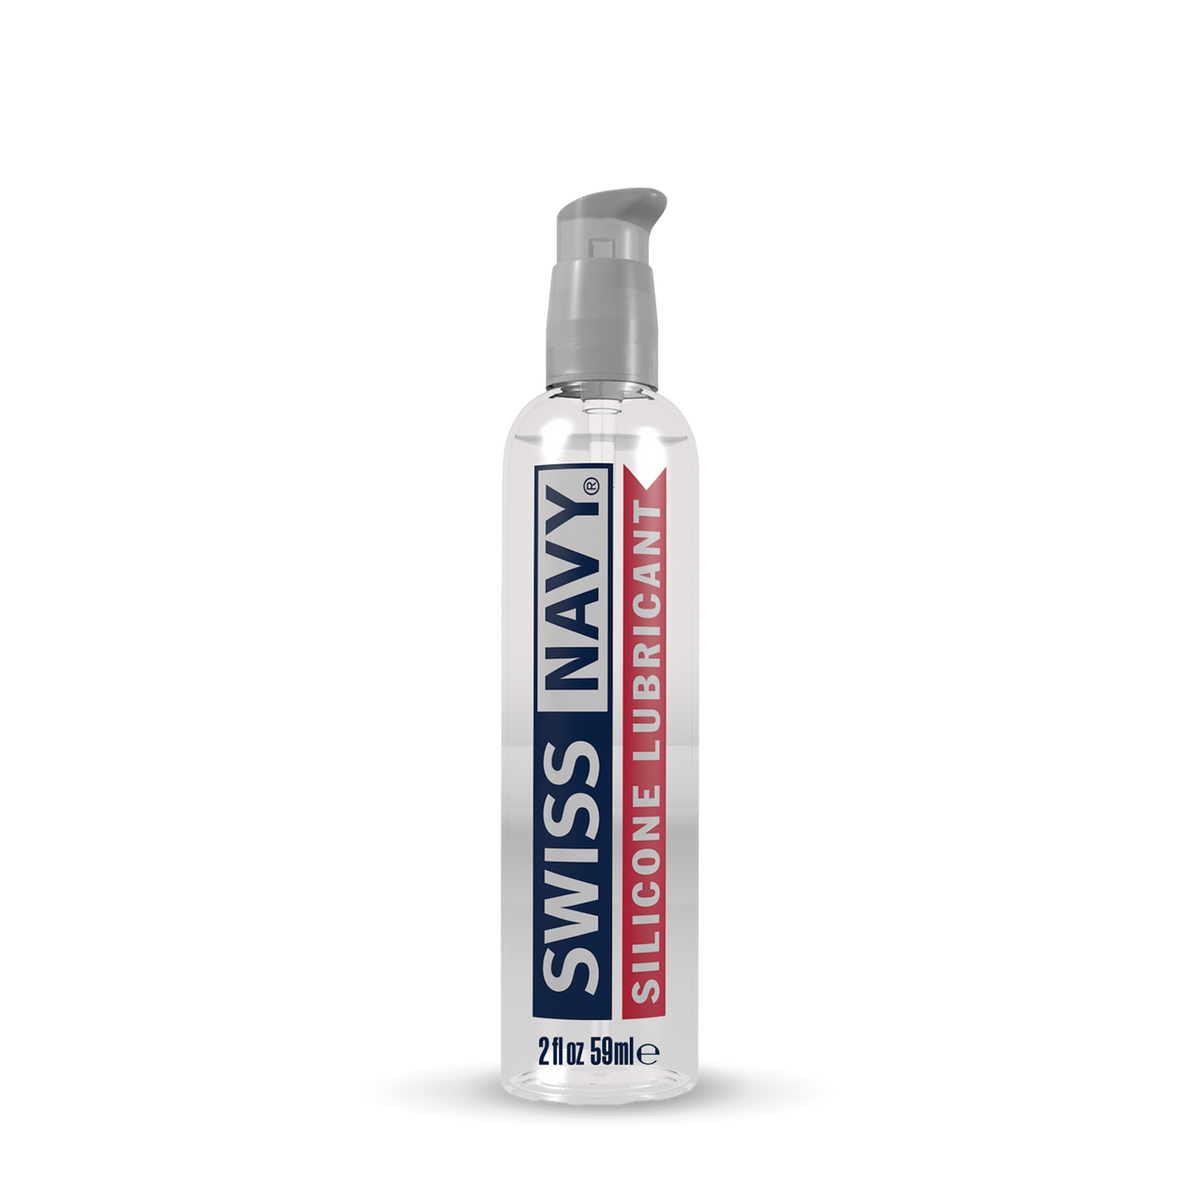 Silicone Based Lubricant